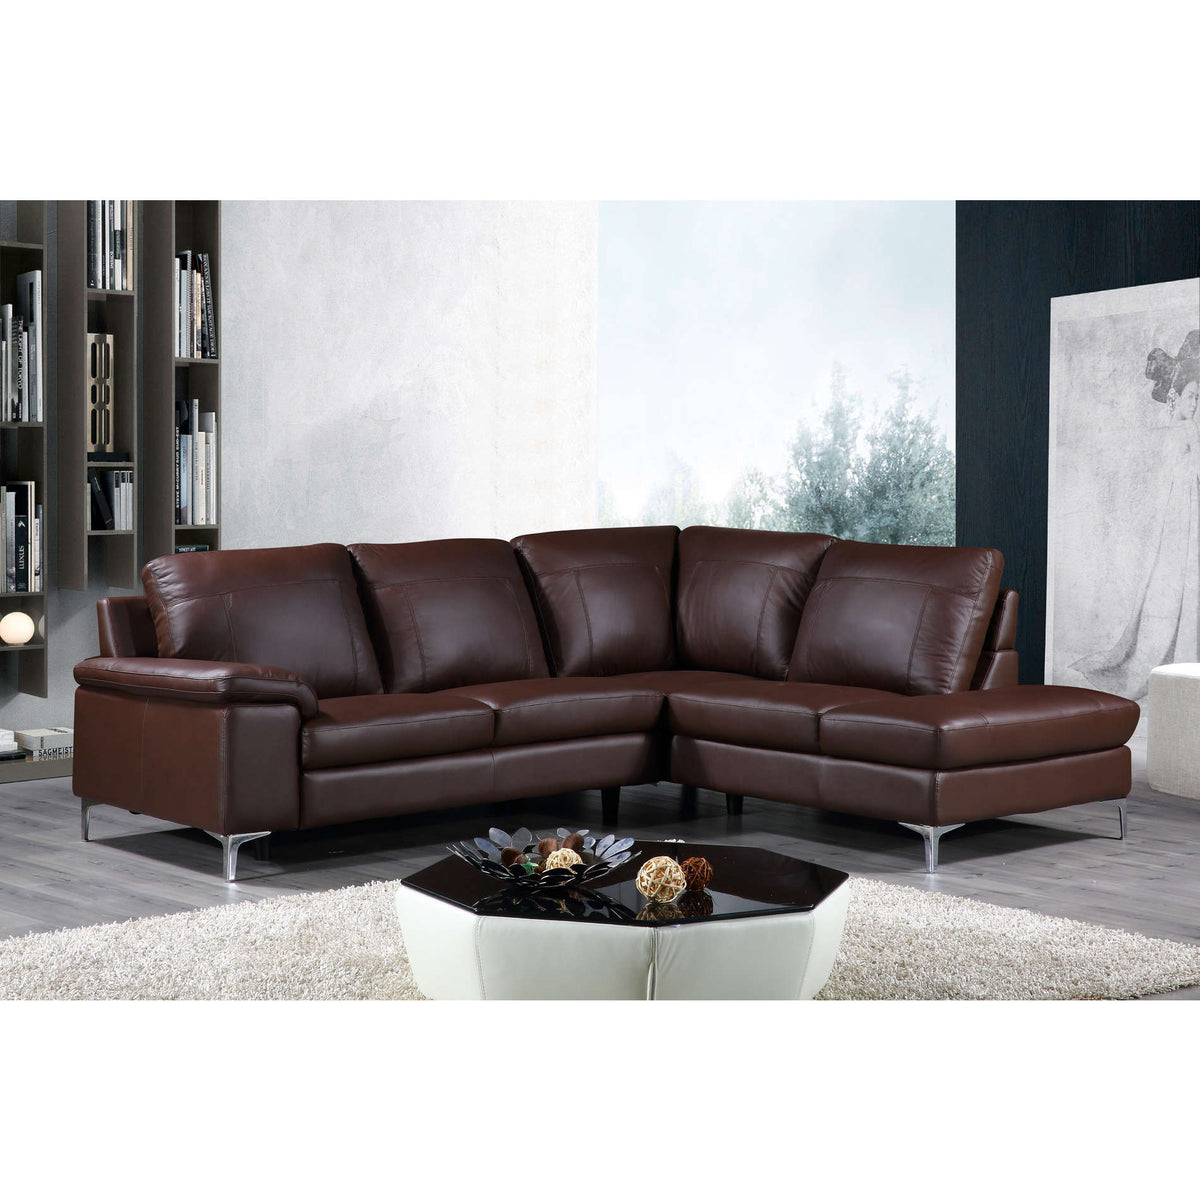 Cortesi Home Contemporary Houston Genuine Leather Sectional Sofa with Right Chaise Lounge, Brown 98&quot;x80&quot;